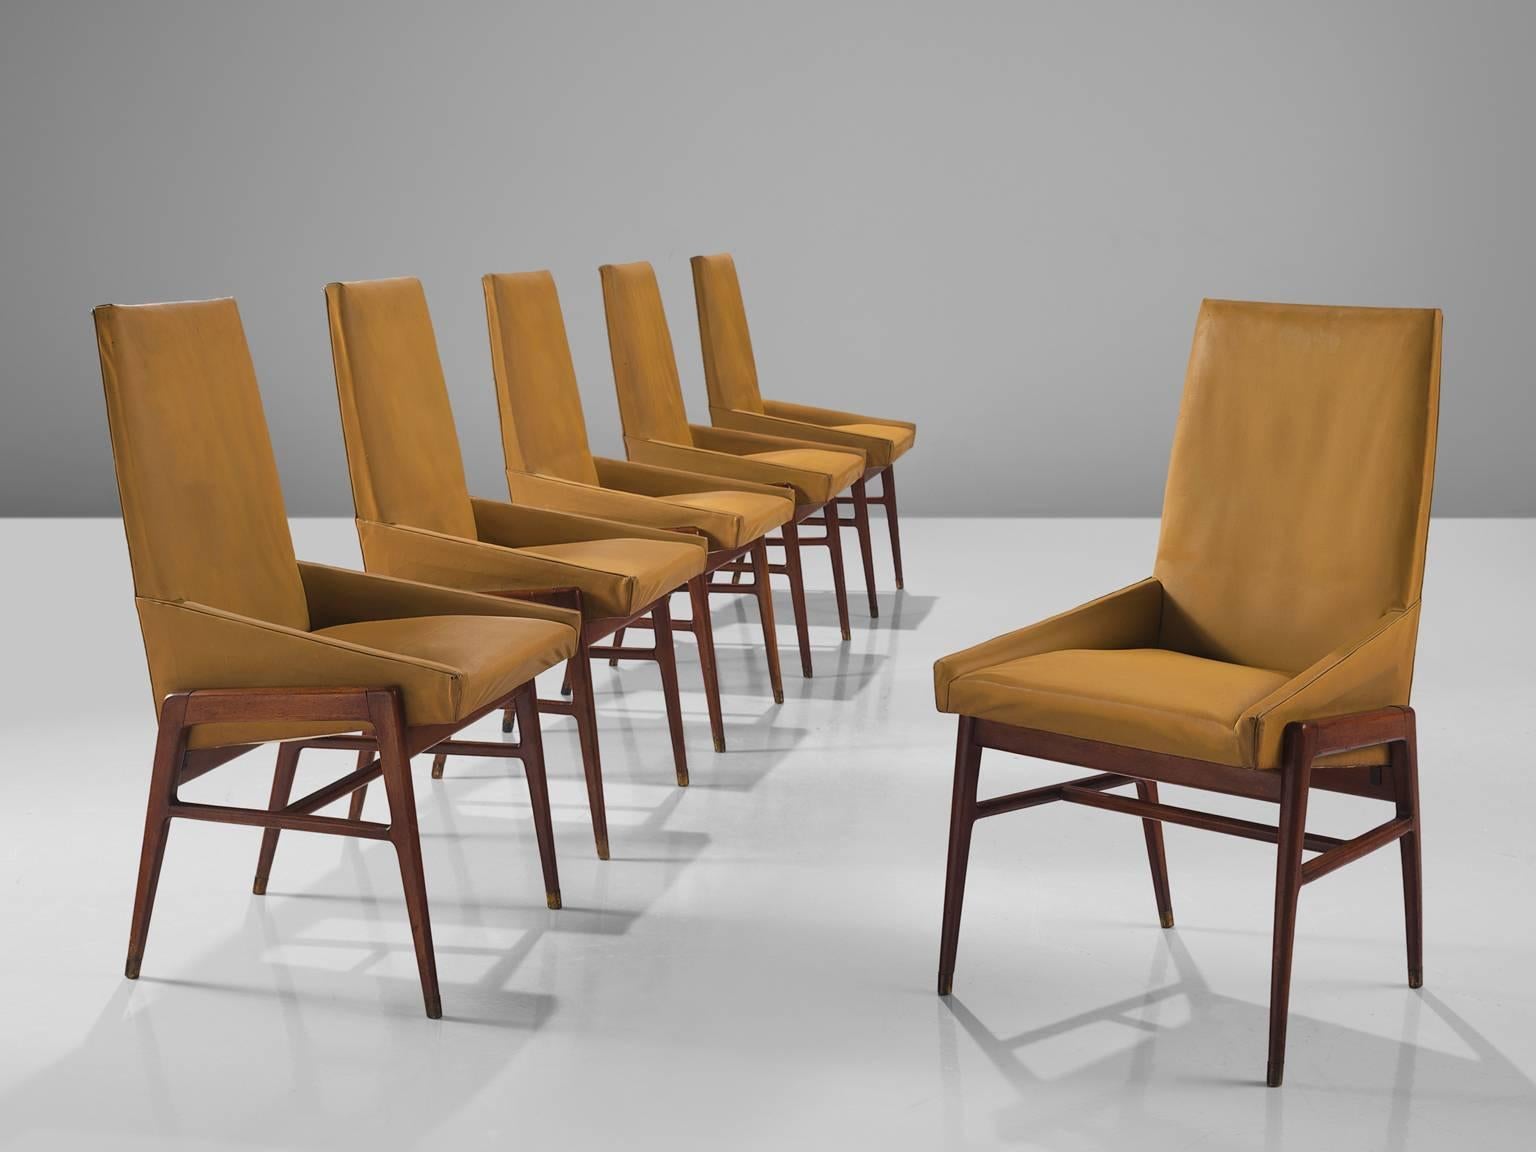 Dining chairs, walnut and ocre yellow faux leather, Italy, ca. 1950

These Italian dining chairs feature straight diagonal edges on the side of the seat and a high back. These majestic chairs have a walnut frame with a beautiful visible grain that